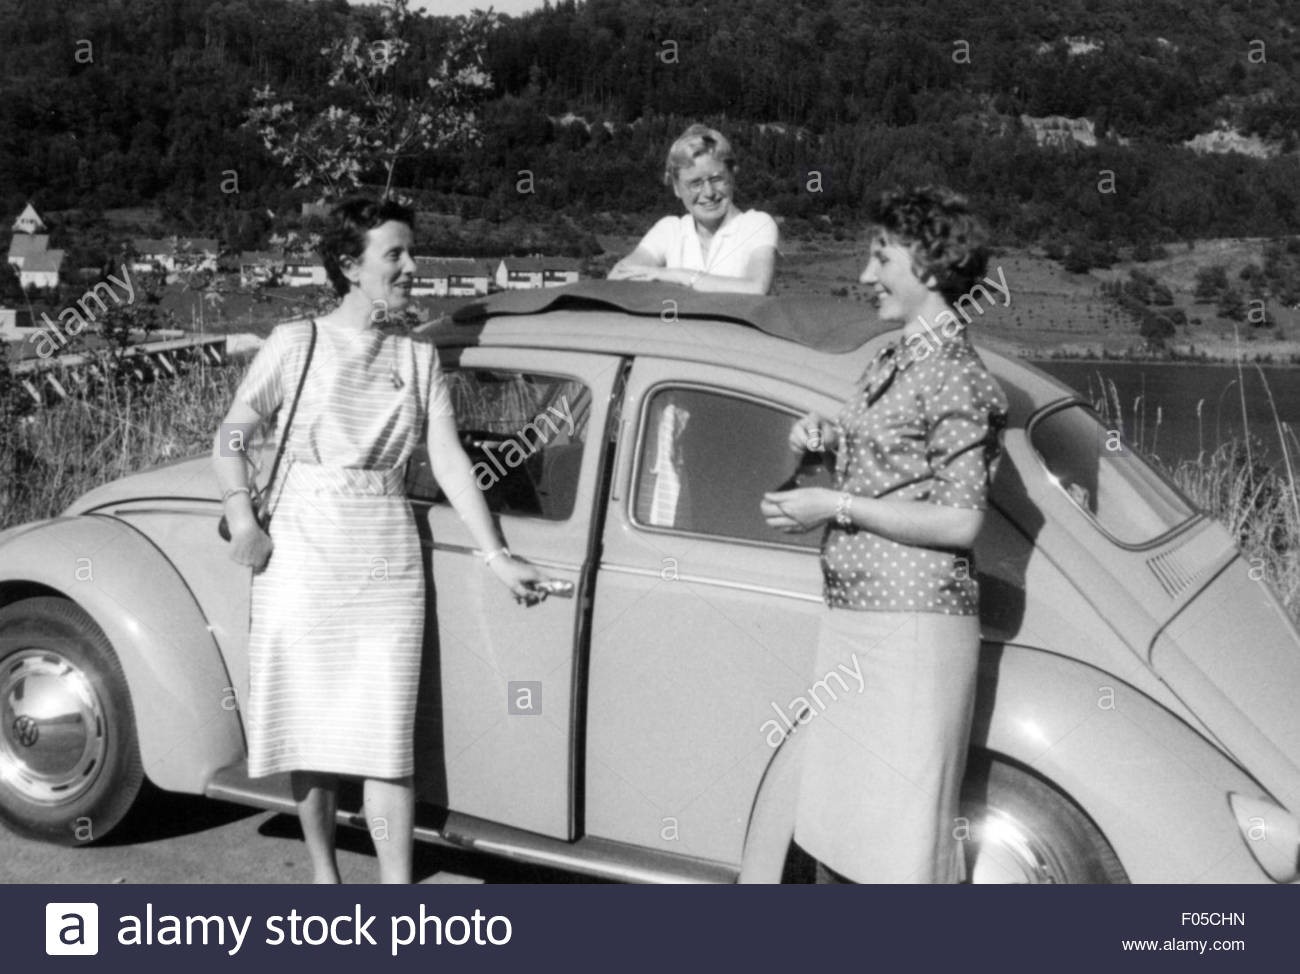 Leisure time excursion. Three women in front of VW Beetle having a break on a roadtrip in 1950s. 